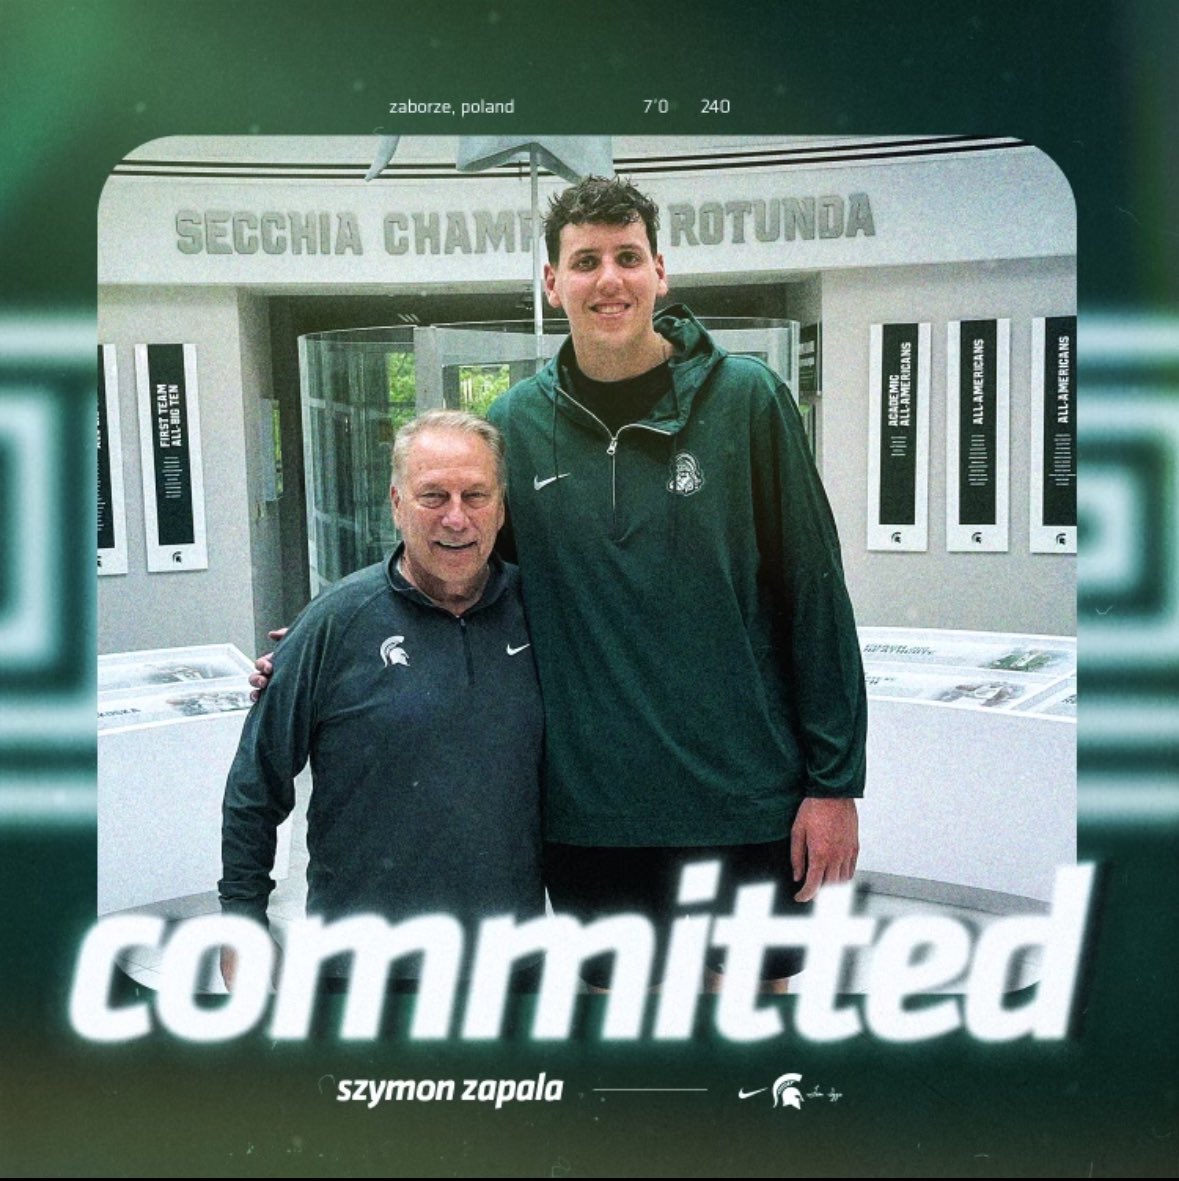 Thrilled to announce my commitment to Michigan State University! Proud to be a Spartan! Let’s get to work!